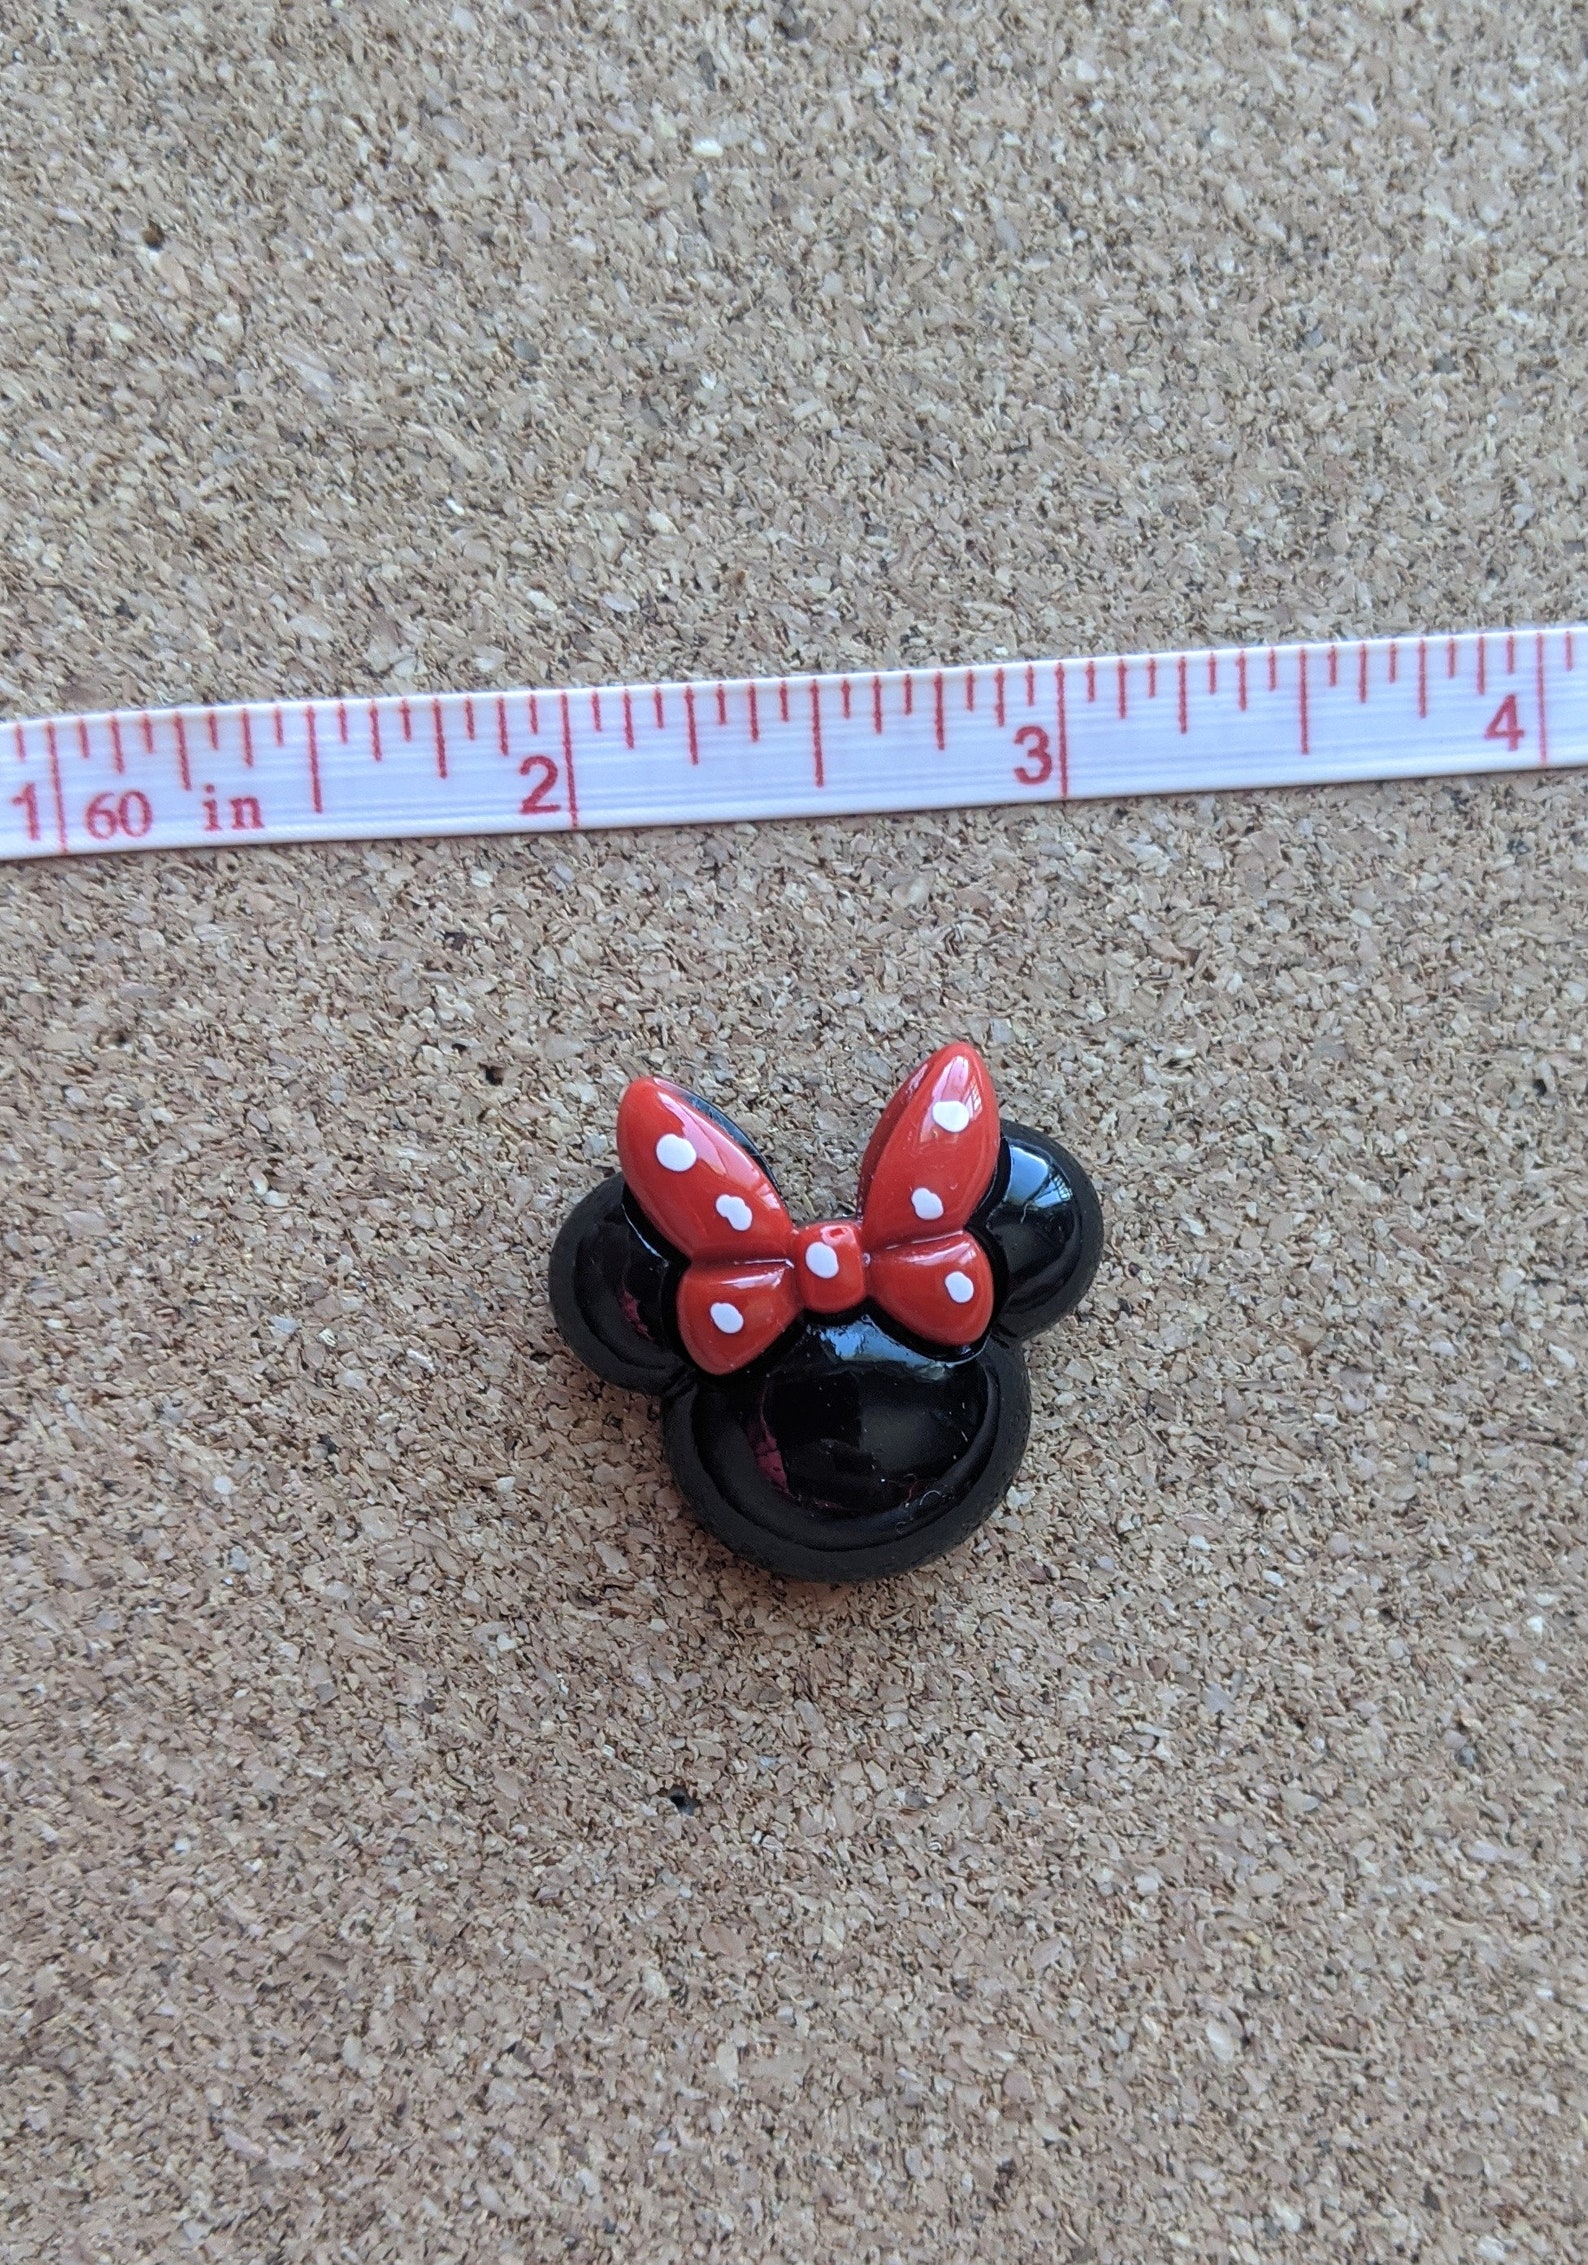 Minnie Mouse Pins Mickey Mouse Pins Mickey Push Pins Minnie | Etsy